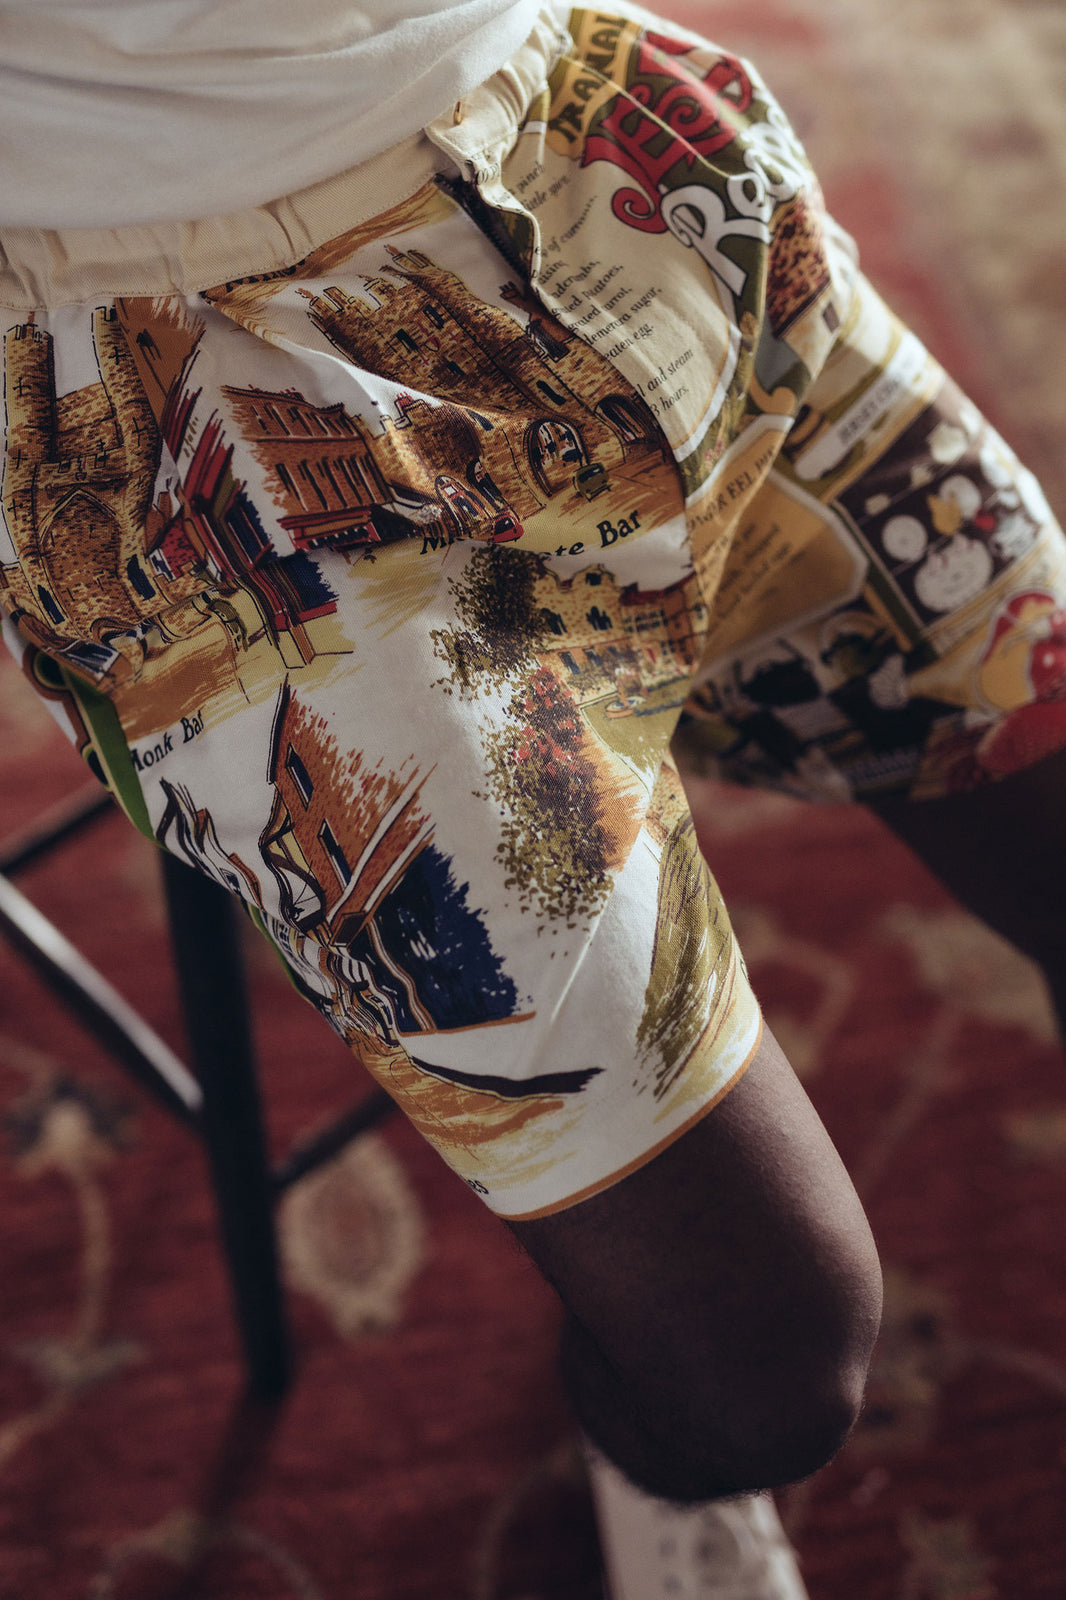 Life of Kings x BKc Canvas Printed Cotton Shorts